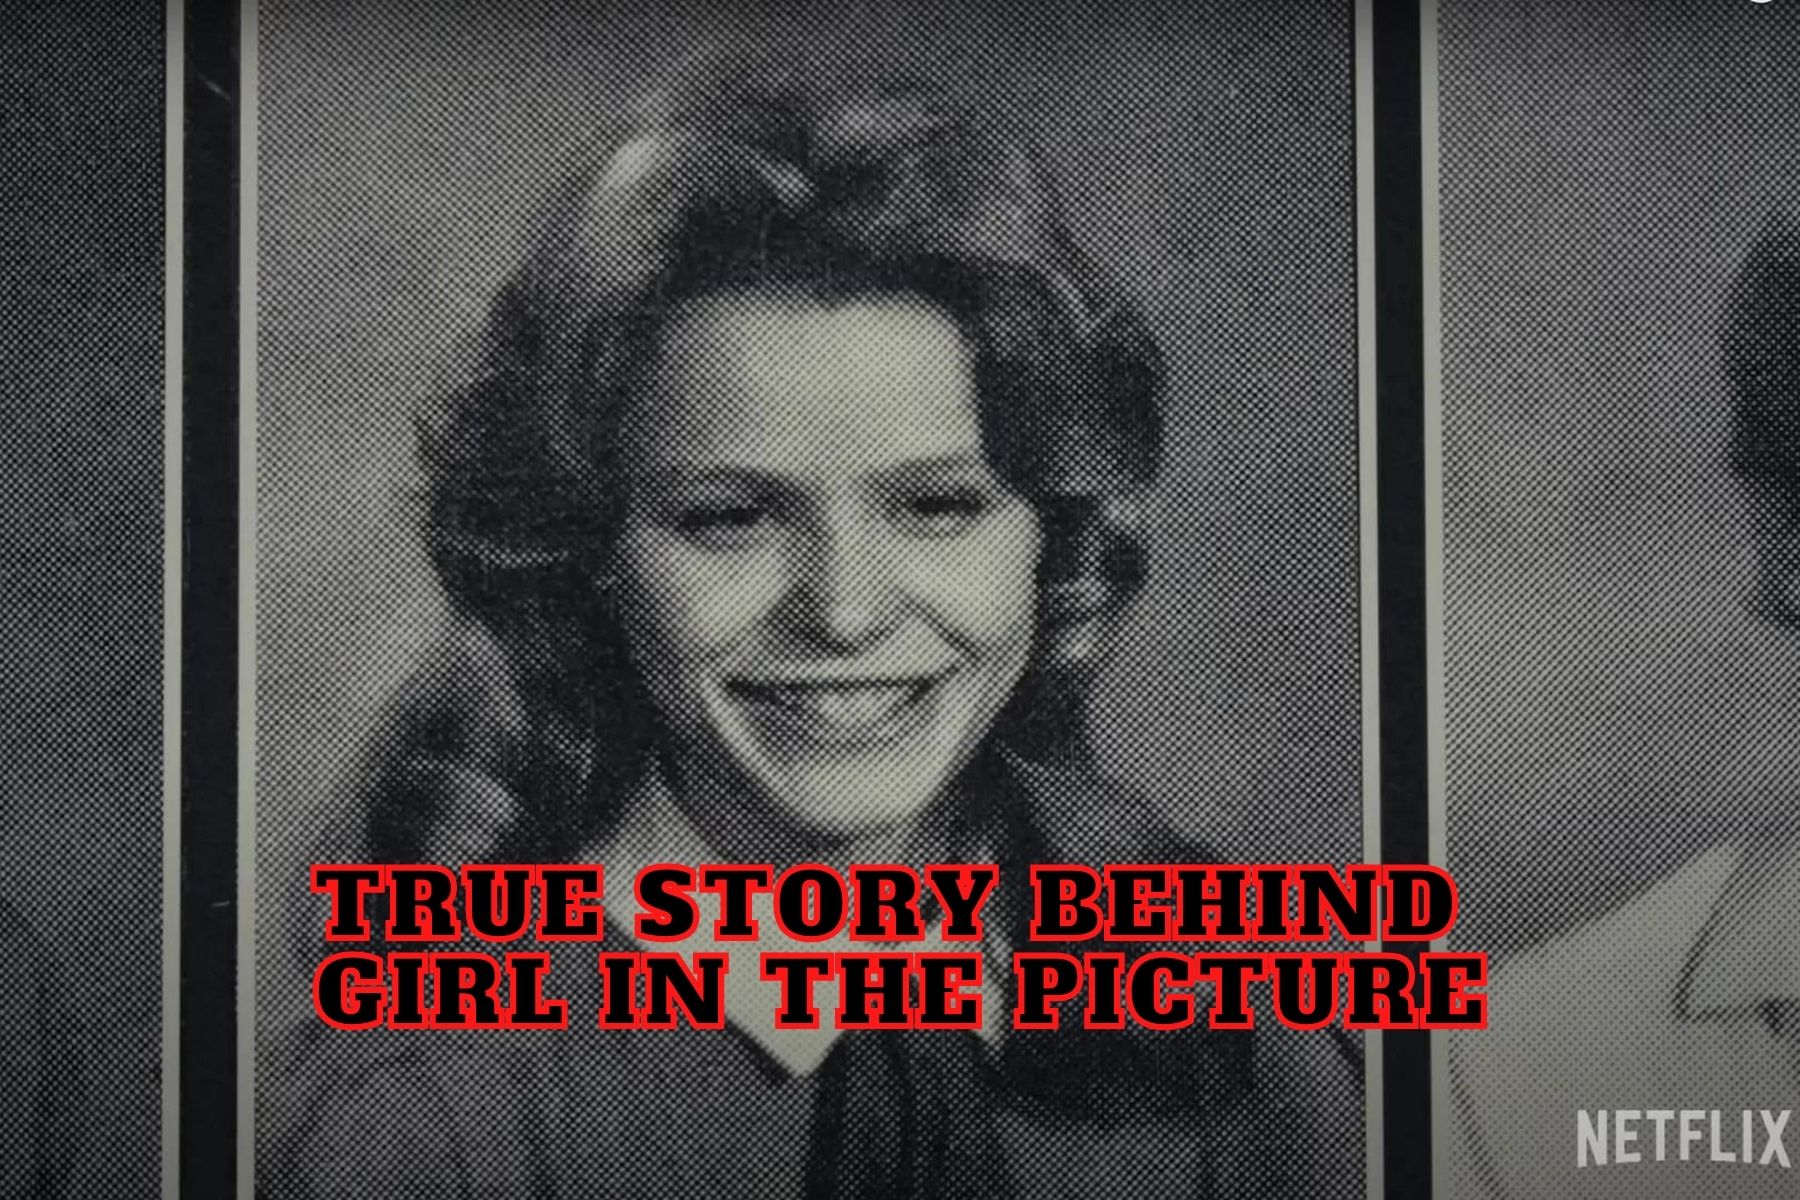 True Story Behind Girl in the Picture - Netflix Documentary